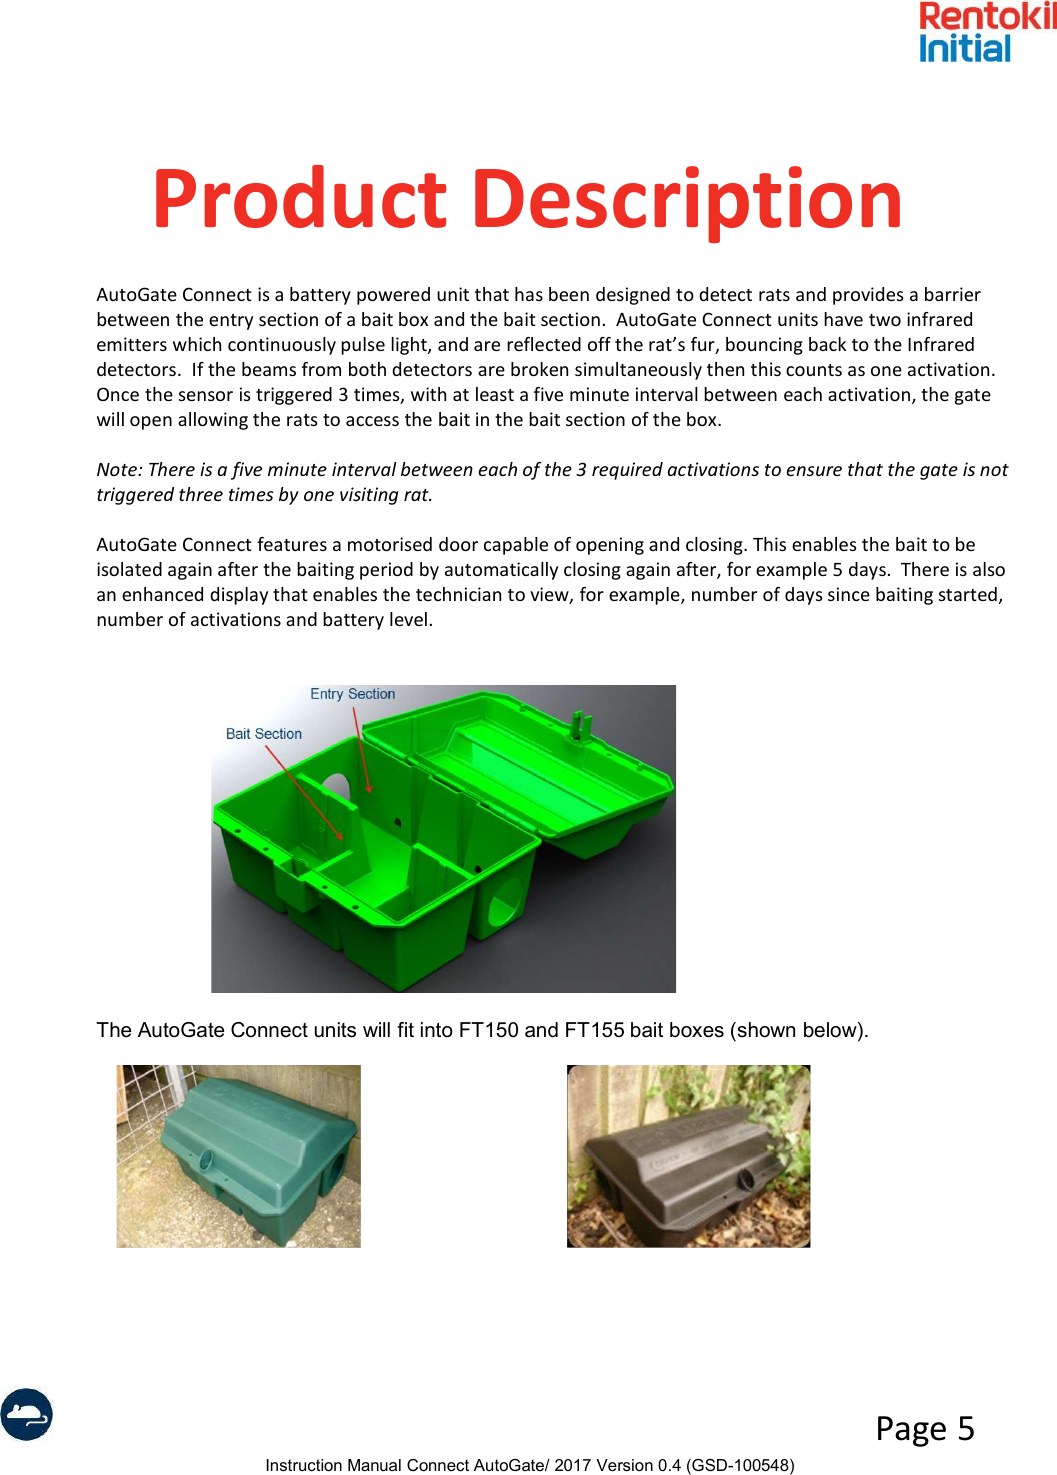 Instruction Manual Connect AutoGate/ 2017 Version 0.4 (GSD-100548)Page 5Product DescriptionAutoGate Connect is a battery powered unit that has been designed to detect rats and provides a barrier between the entry section of a bait box and the bait section.  AutoGate Connect units have two infrared emitters which continuously pulse light, and are reflected off the rat’s fur, bouncing back to the Infrared detectors.  If the beams from both detectors are broken simultaneously then this counts as one activation. Once the sensor is triggered 3 times, with at least a five minute interval between each activation, the gate will open allowing the rats to access the bait in the bait section of the box.Note: There is a five minute interval between each of the 3 required activations to ensure that the gate is not triggered three times by one visiting rat.AutoGate Connect features a motorised door capable of opening and closing. This enables the bait to be isolated again after the baiting period by automatically closing again after, for example 5 days.  There is also an enhanced display that enables the technician to view, for example, number of days since baiting started, number of activations and battery level. The AutoGate Connect units will fit into FT150 and FT155 bait boxes (shown below). 